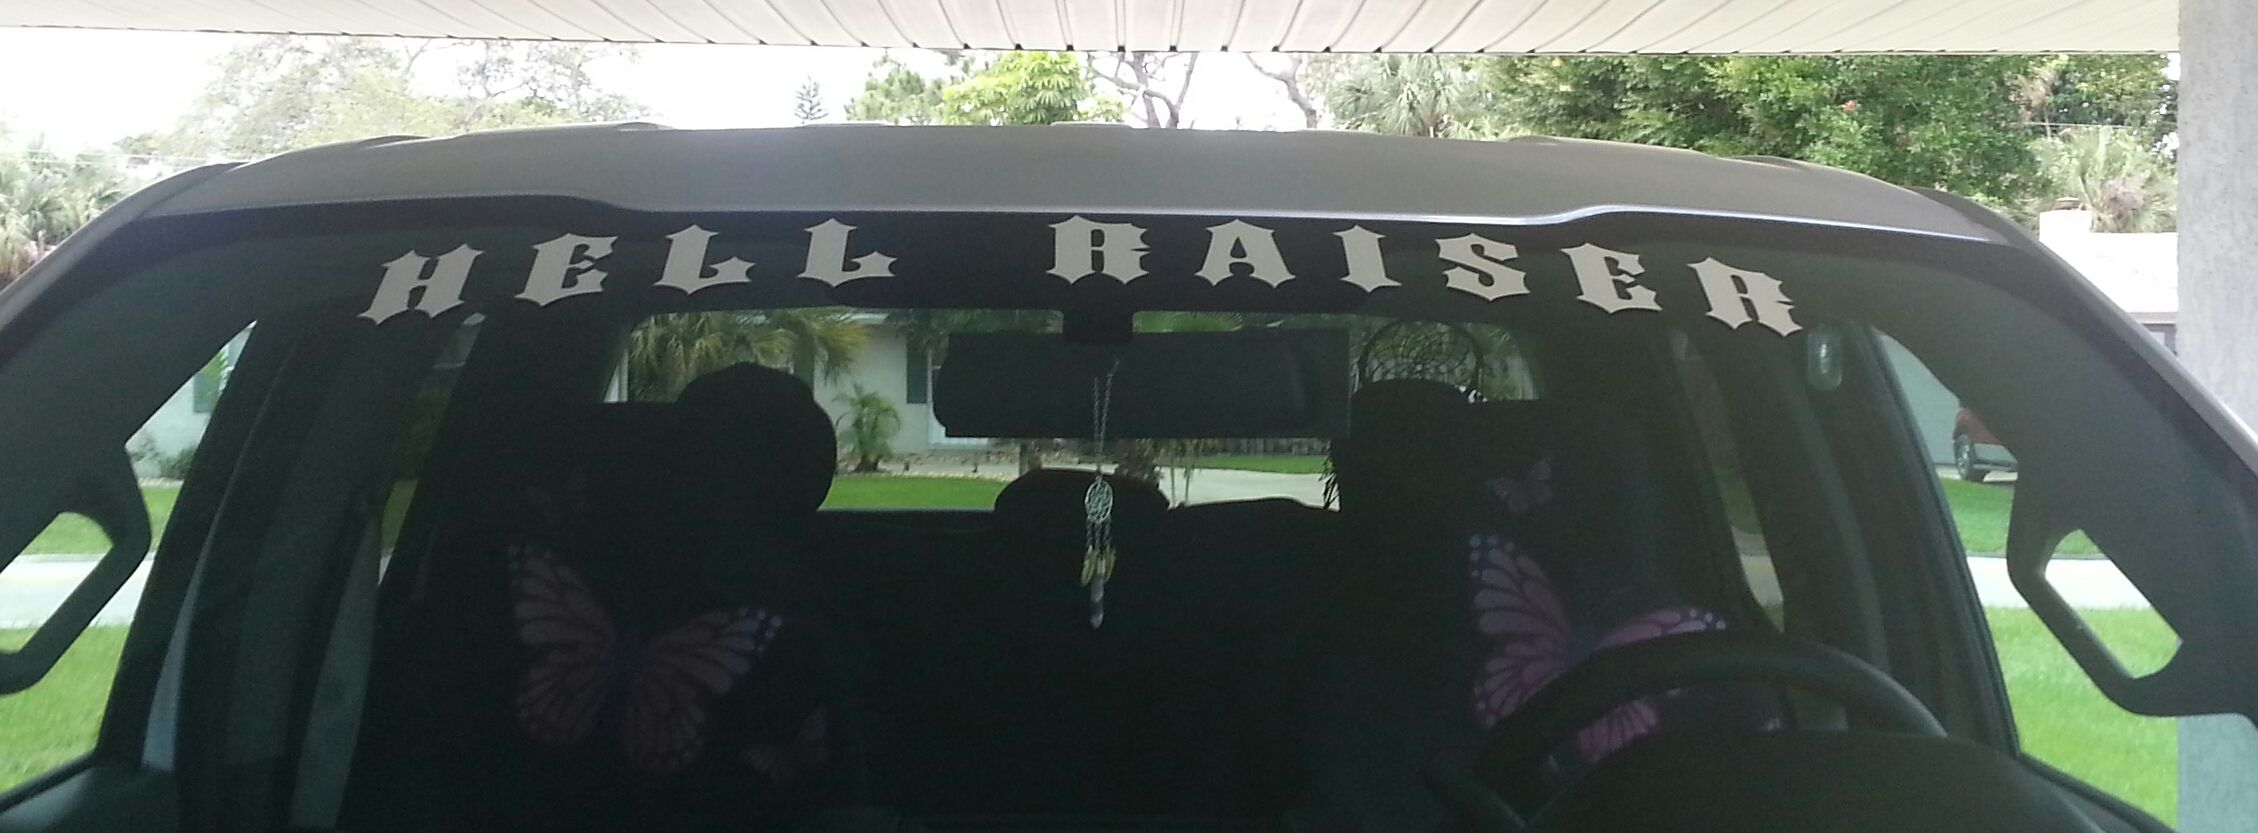 windshield lettering decal